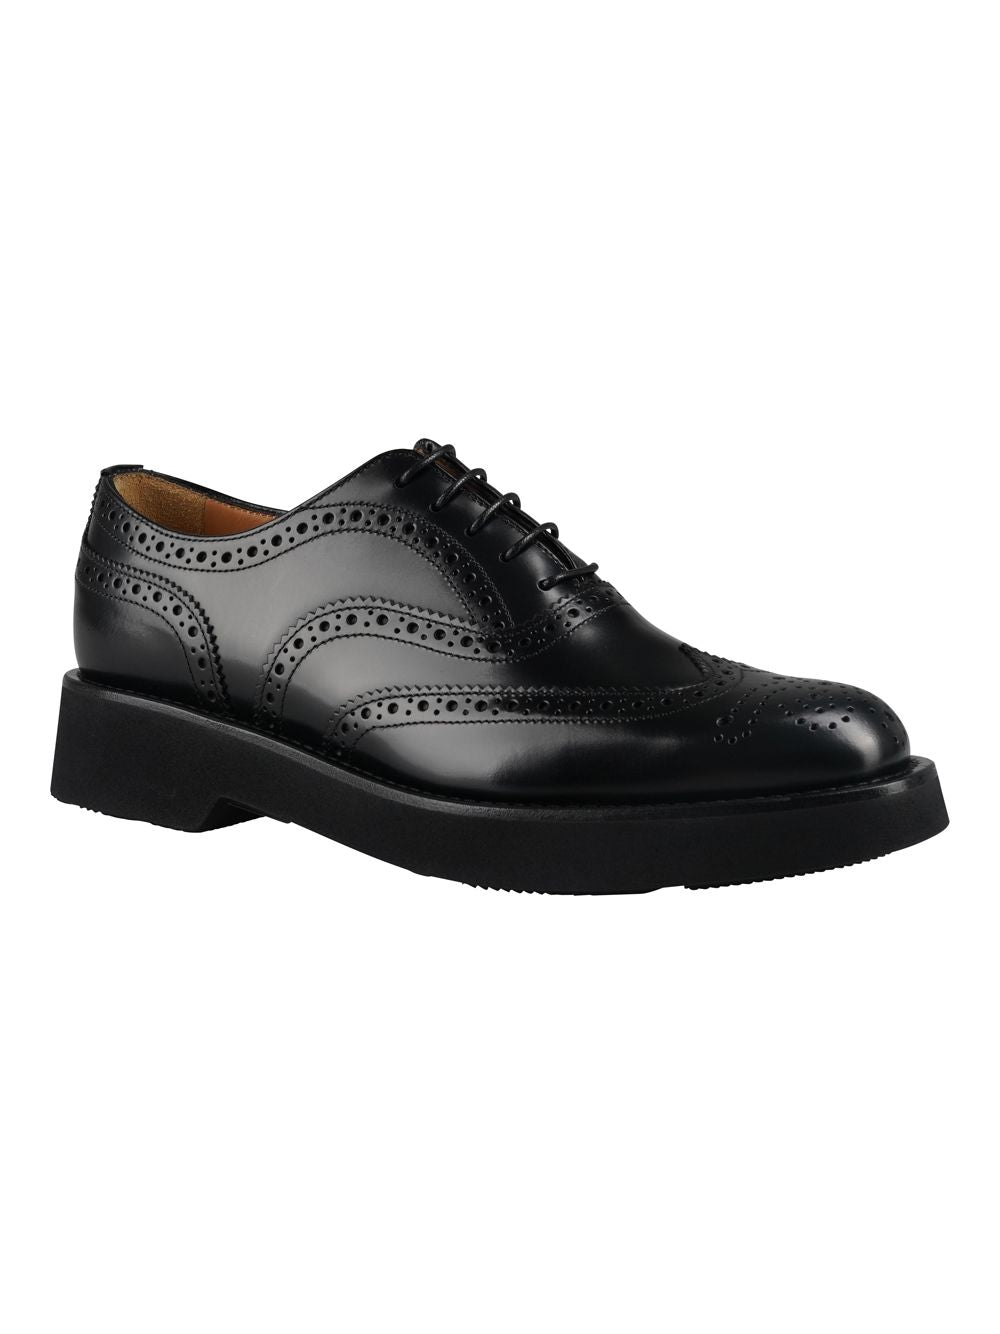 Shop Church's Perforated Leather Oxford Shoes For Women In Black